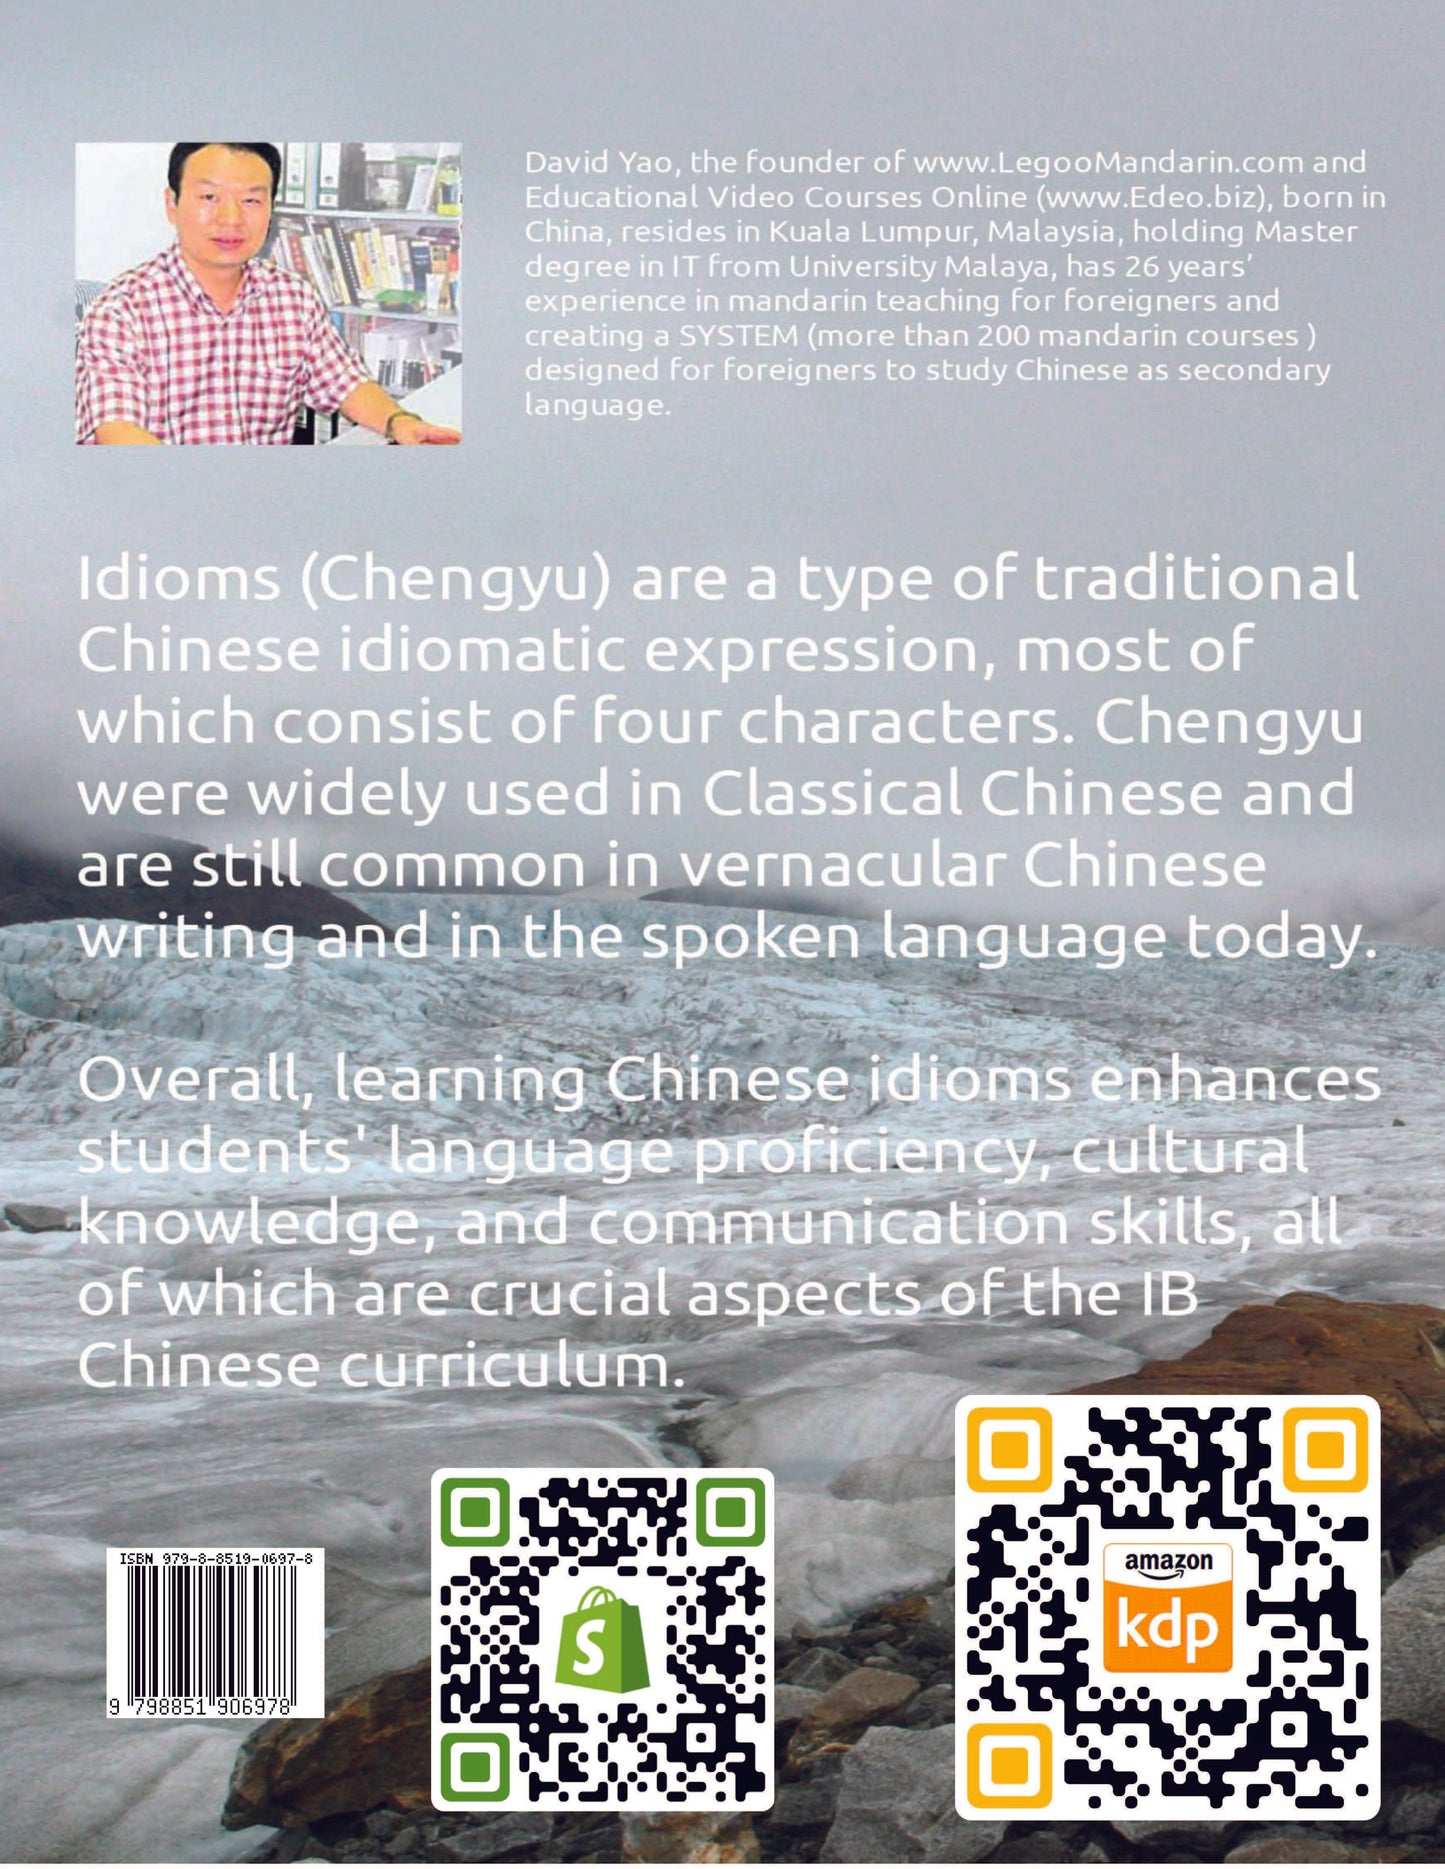 800 Chinese Idioms for IB Chinese (B SL)